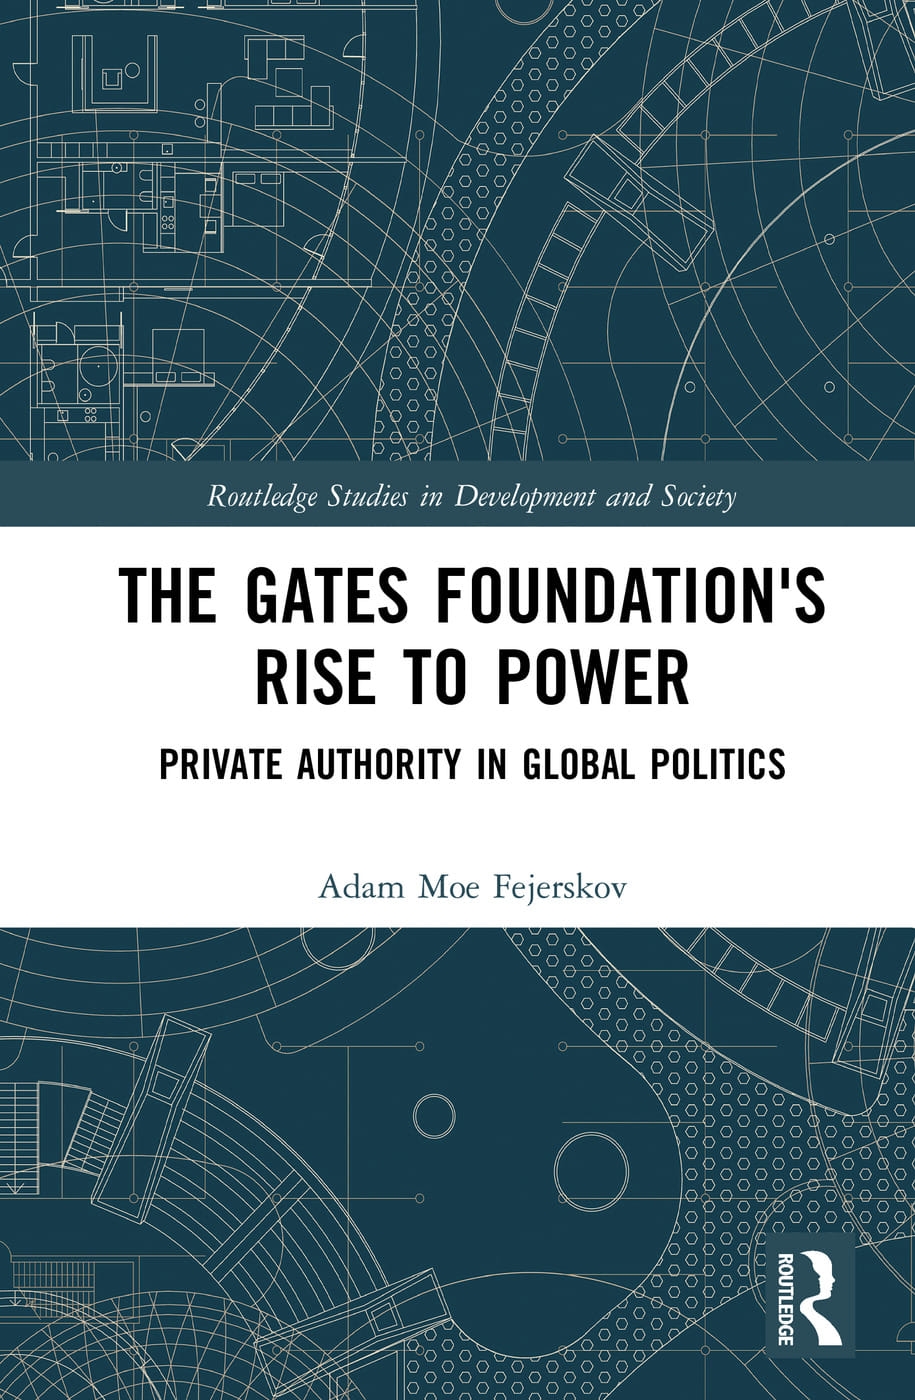 The Gates Foundation’s Rise to Power: Private Authority in Global Politics